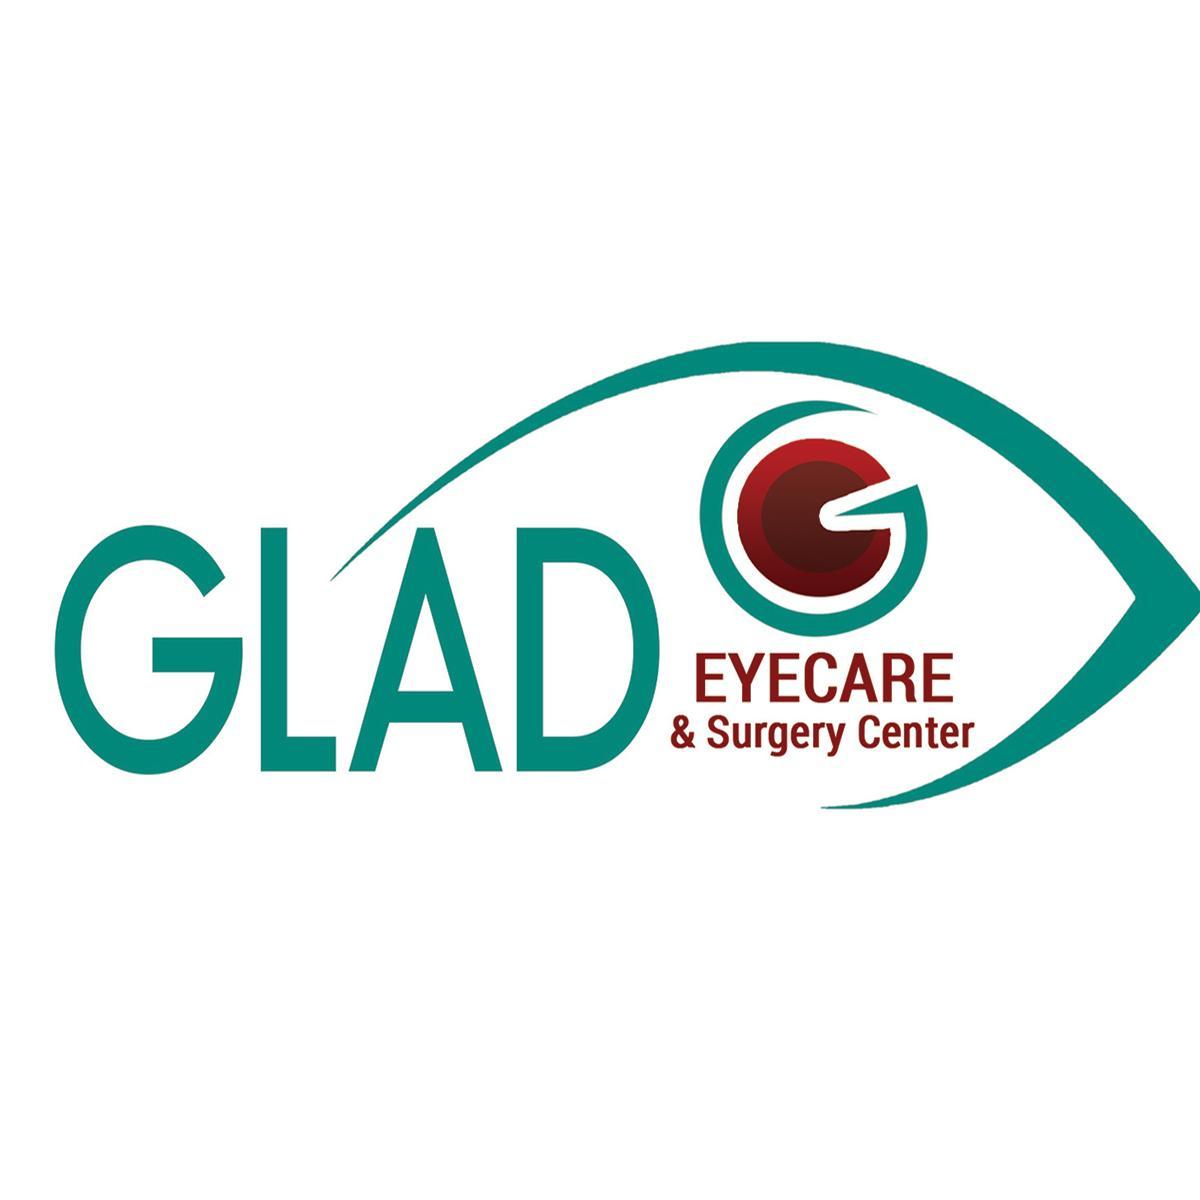 Glad Eyecare & Aesthetics offers eye care treatments and also cosmetic procedures.